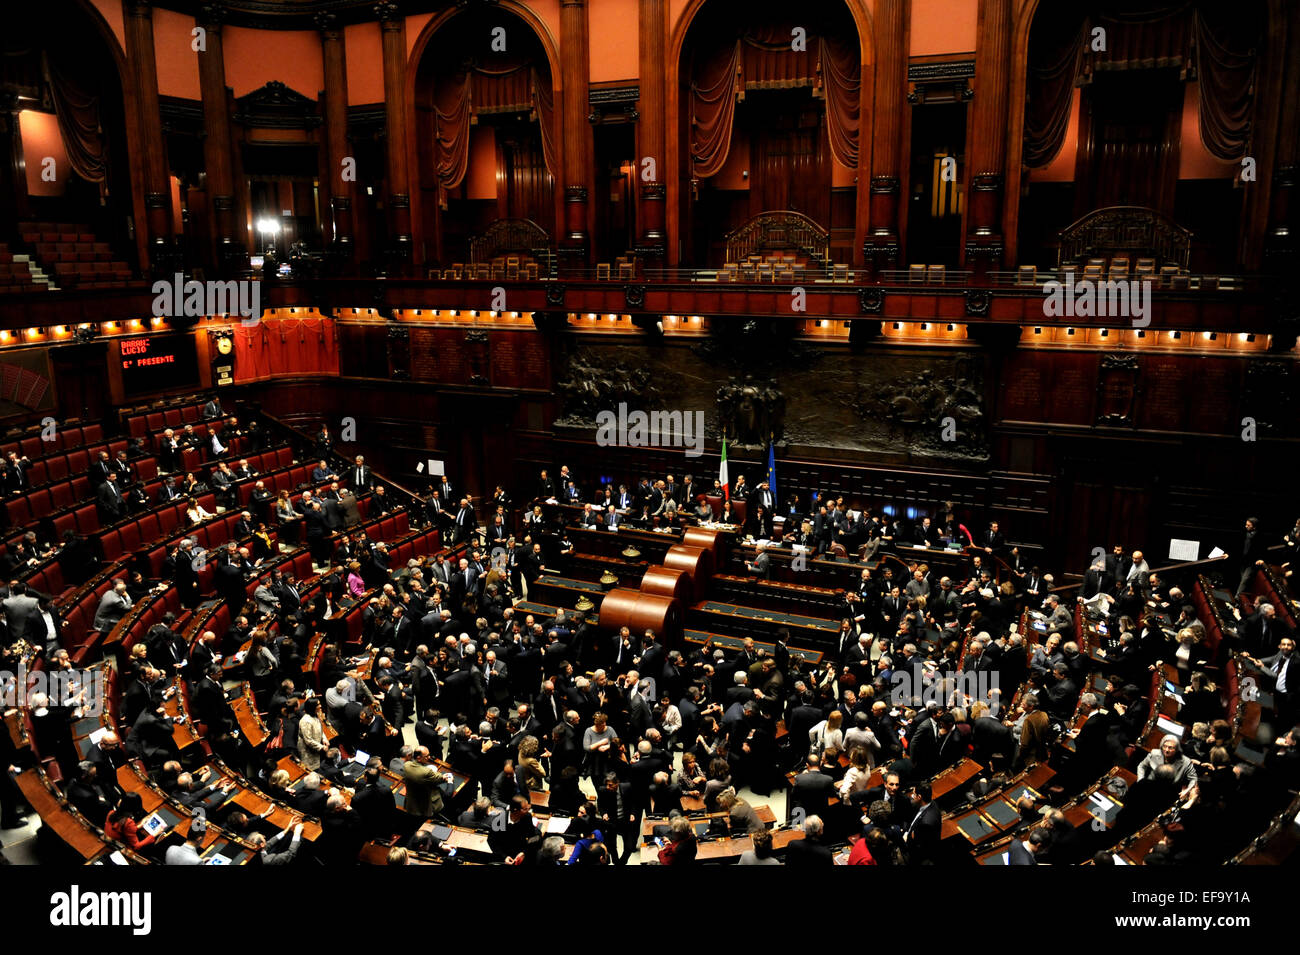 Rome. 29th Jan, 2015. Photo taken on Jan. 29, 2015 shows a general view of the voting in Italian Parliament in Rome, Italy. Italian parliament gathered in joint session of both Houses on Thursday for the first round of voting to elect the new president, after 89-year-old Giorgio Napolitano resigned on January 14th. © Xu Nizhi/Xinhua/Alamy Live News Stock Photo